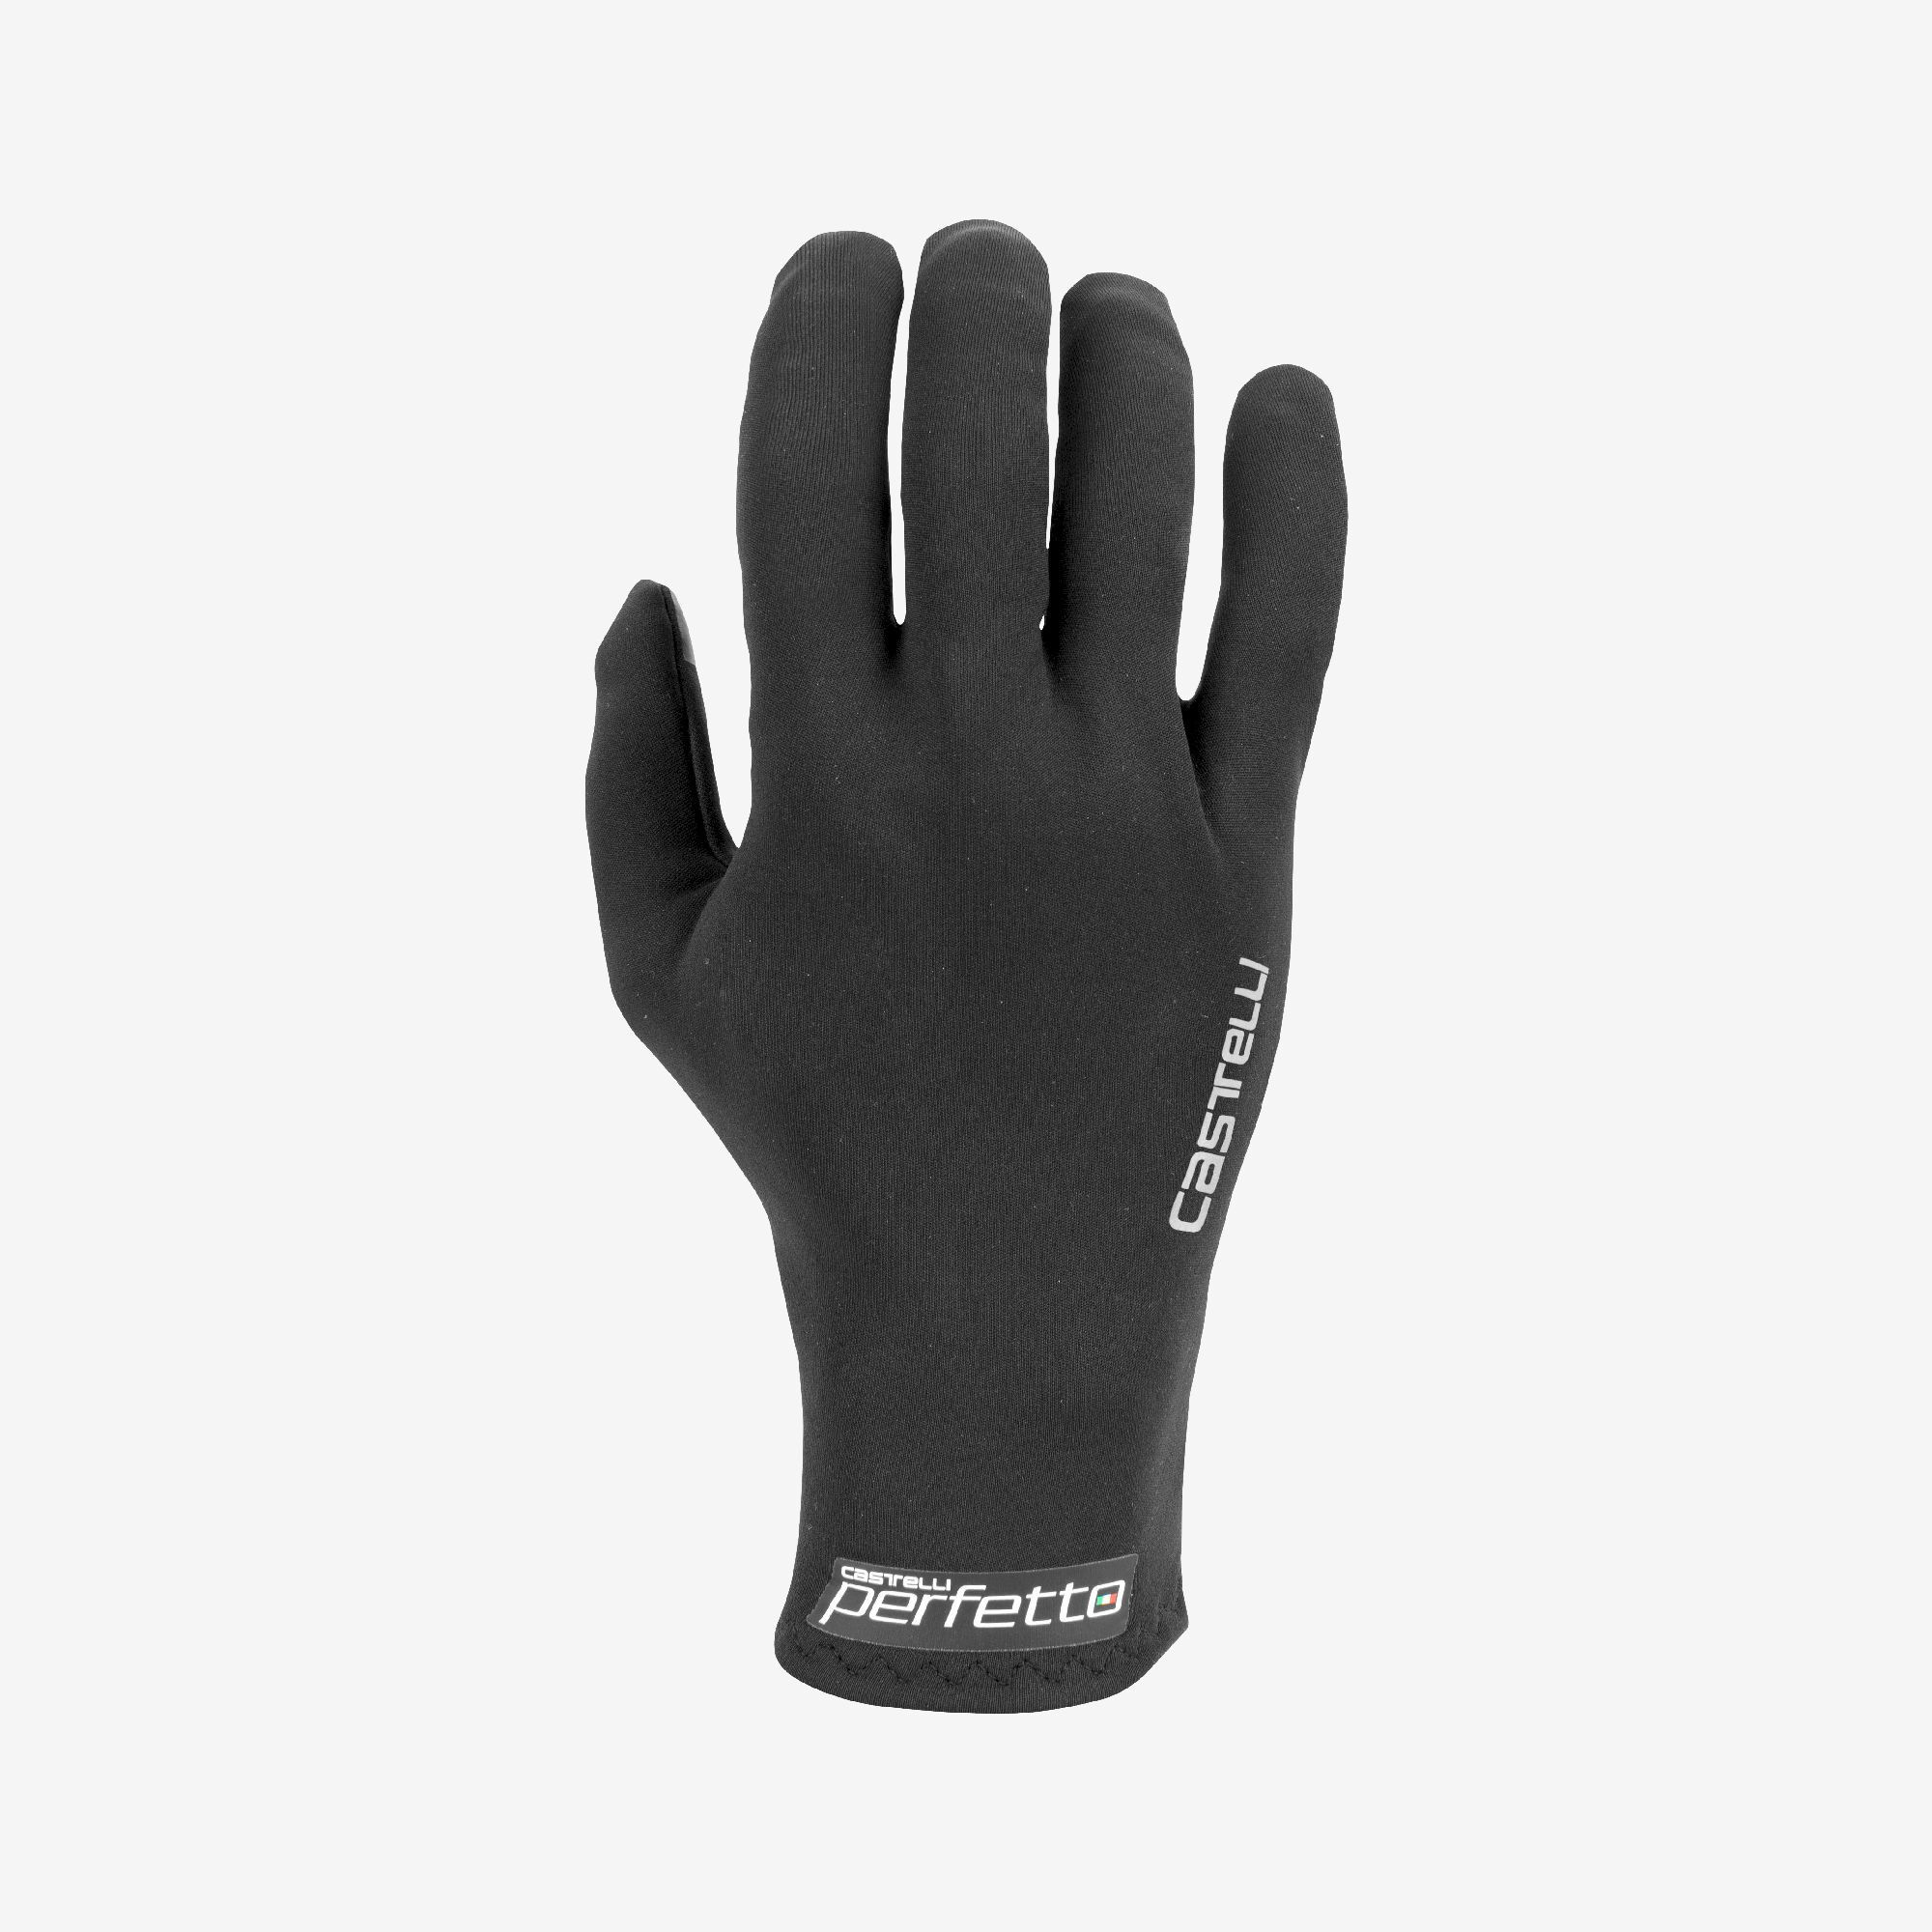 Castelli Perfetto RoS Glove - Cycling gloves - Women's | Hardloop